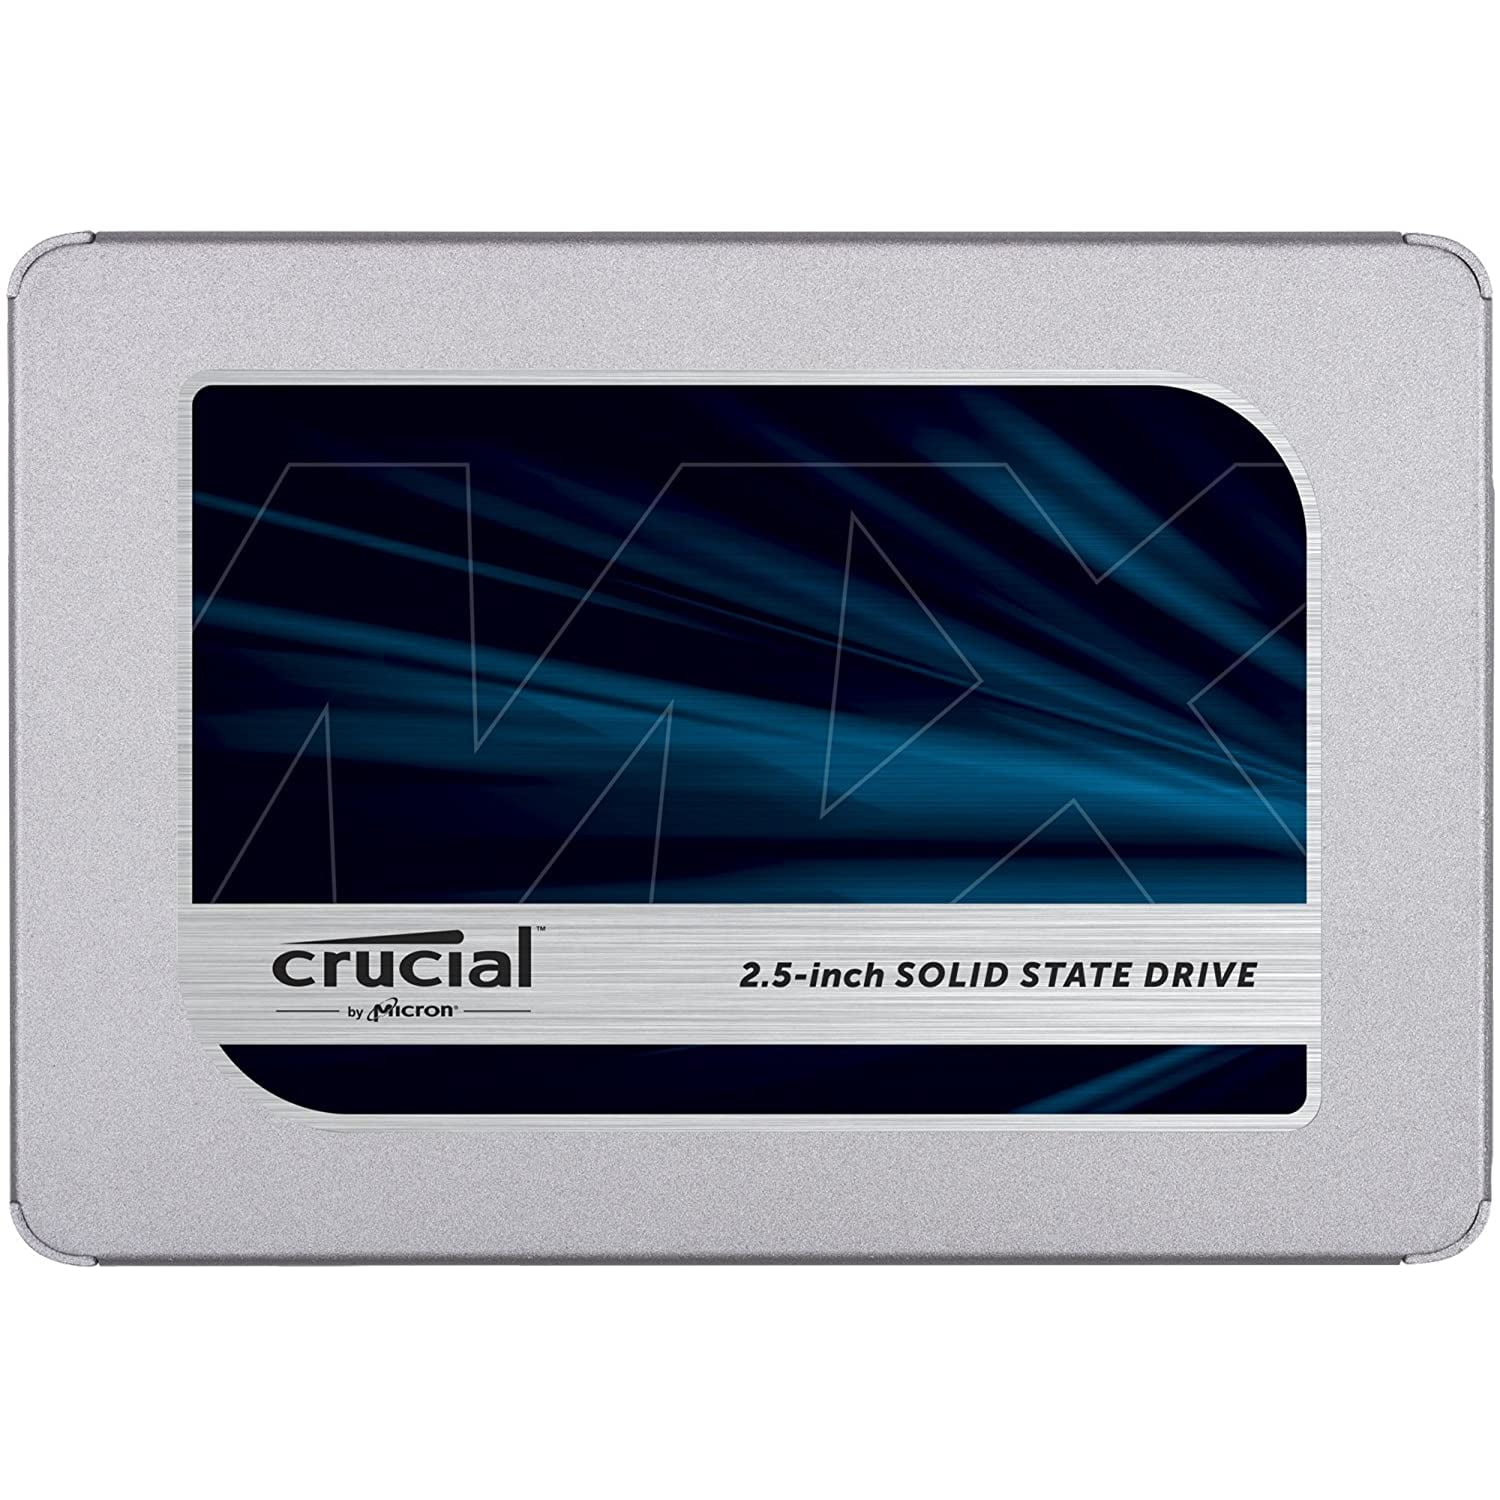 Crucial BX300 240GB SATA 2.5 Inch Internal Solid State Drive CT240BX300SSD1